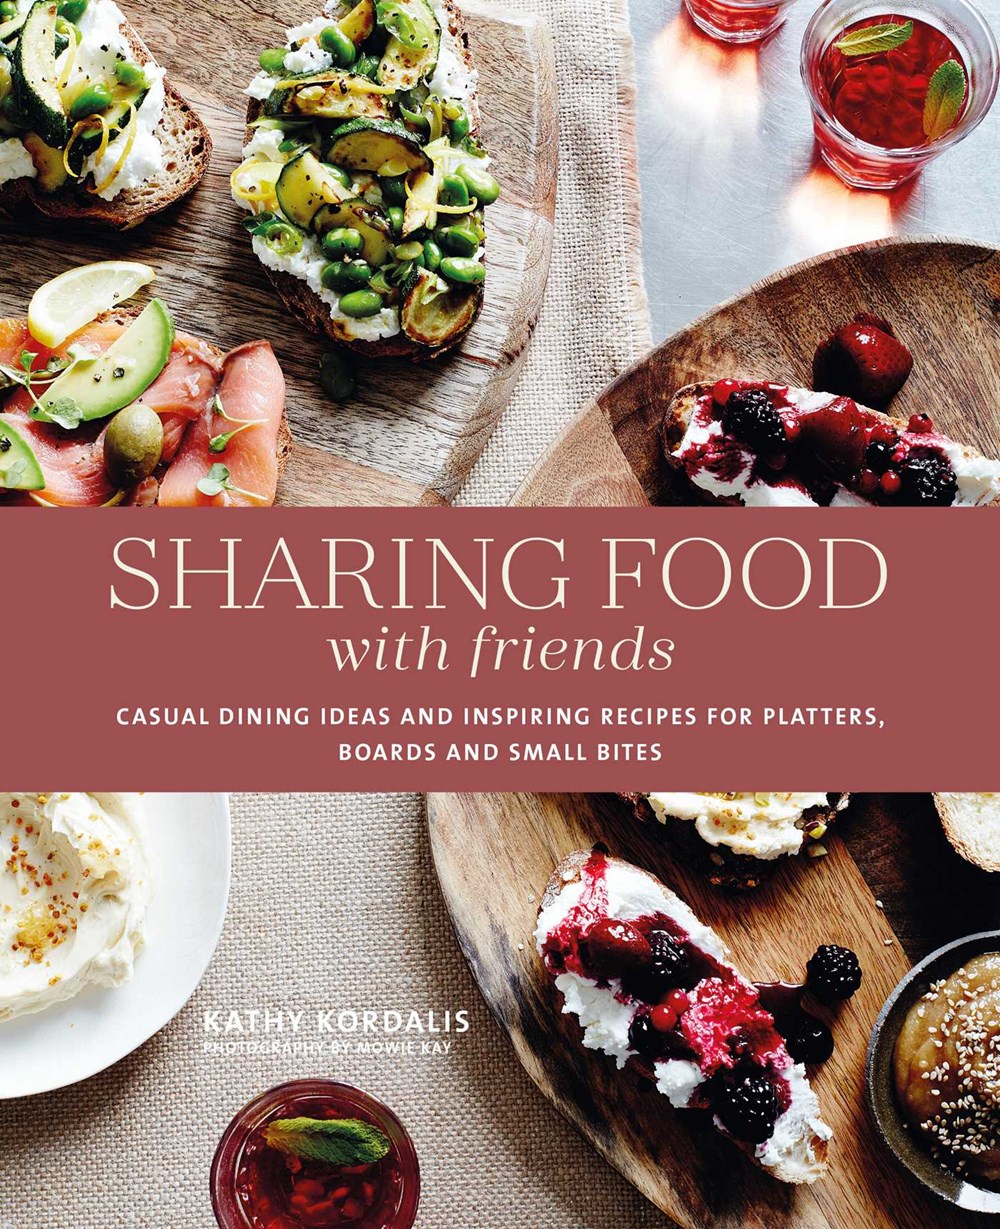 Sharing Food with Friends Cookbook